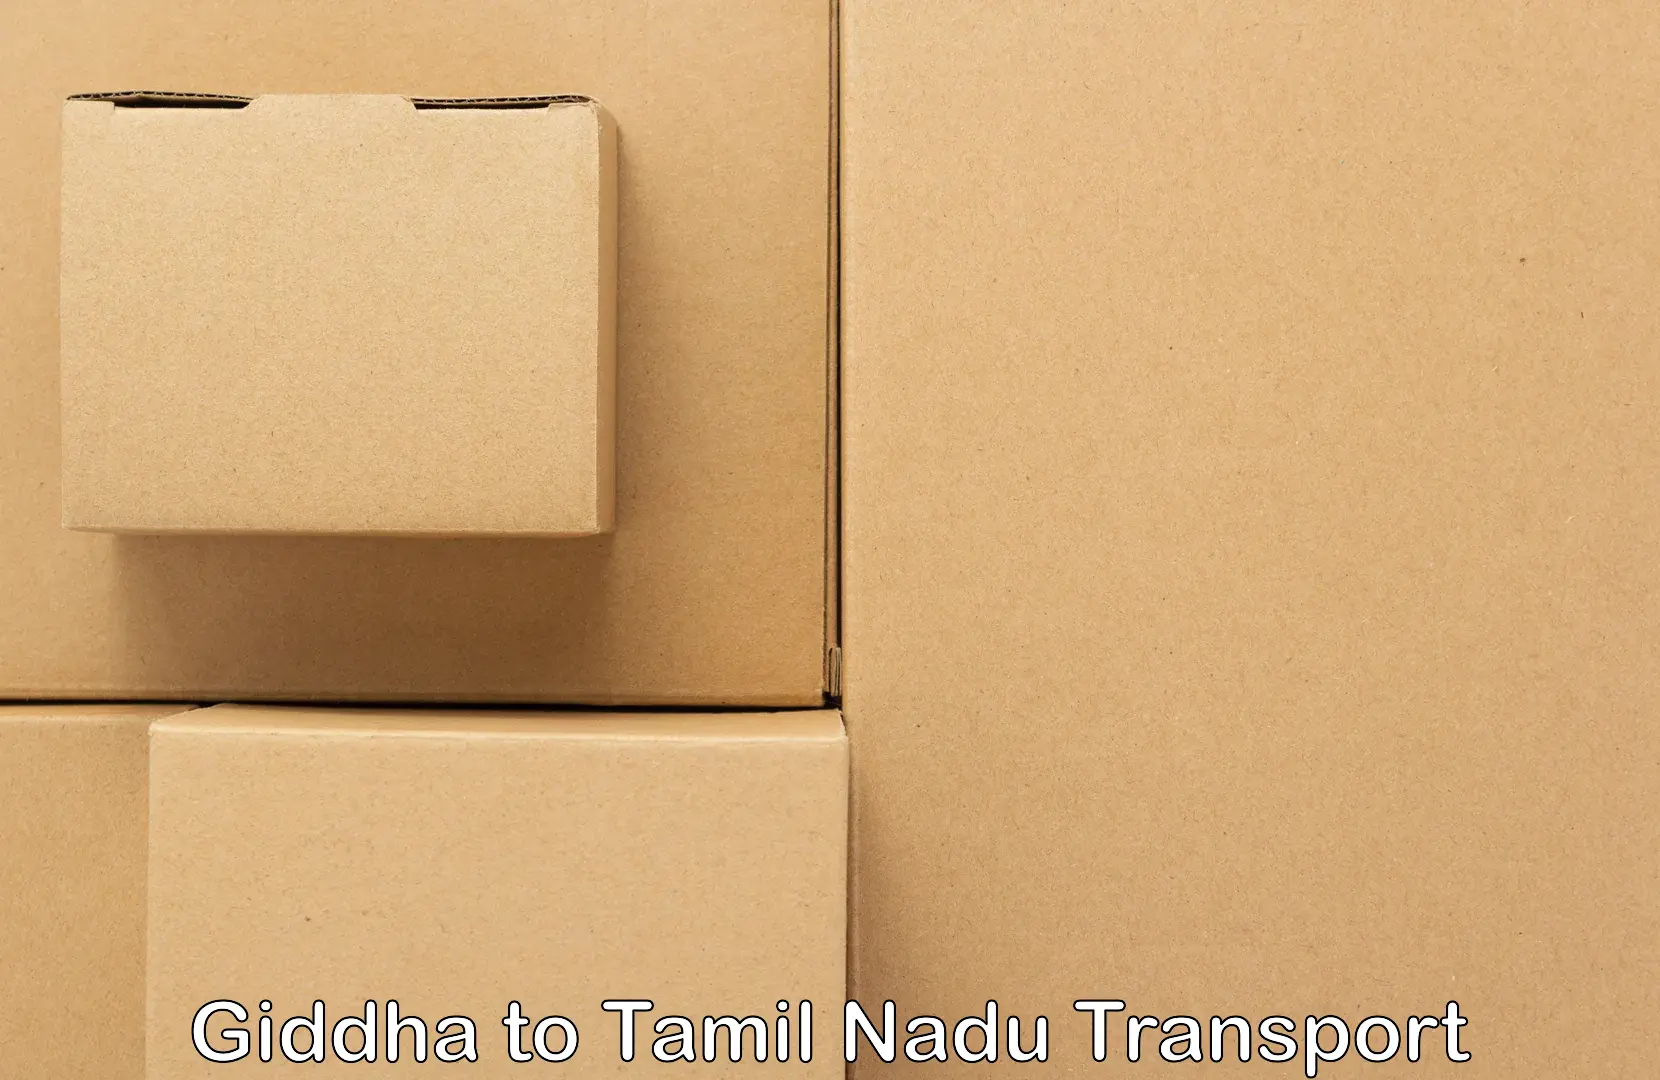 Nearest transport service Giddha to Thisayanvilai